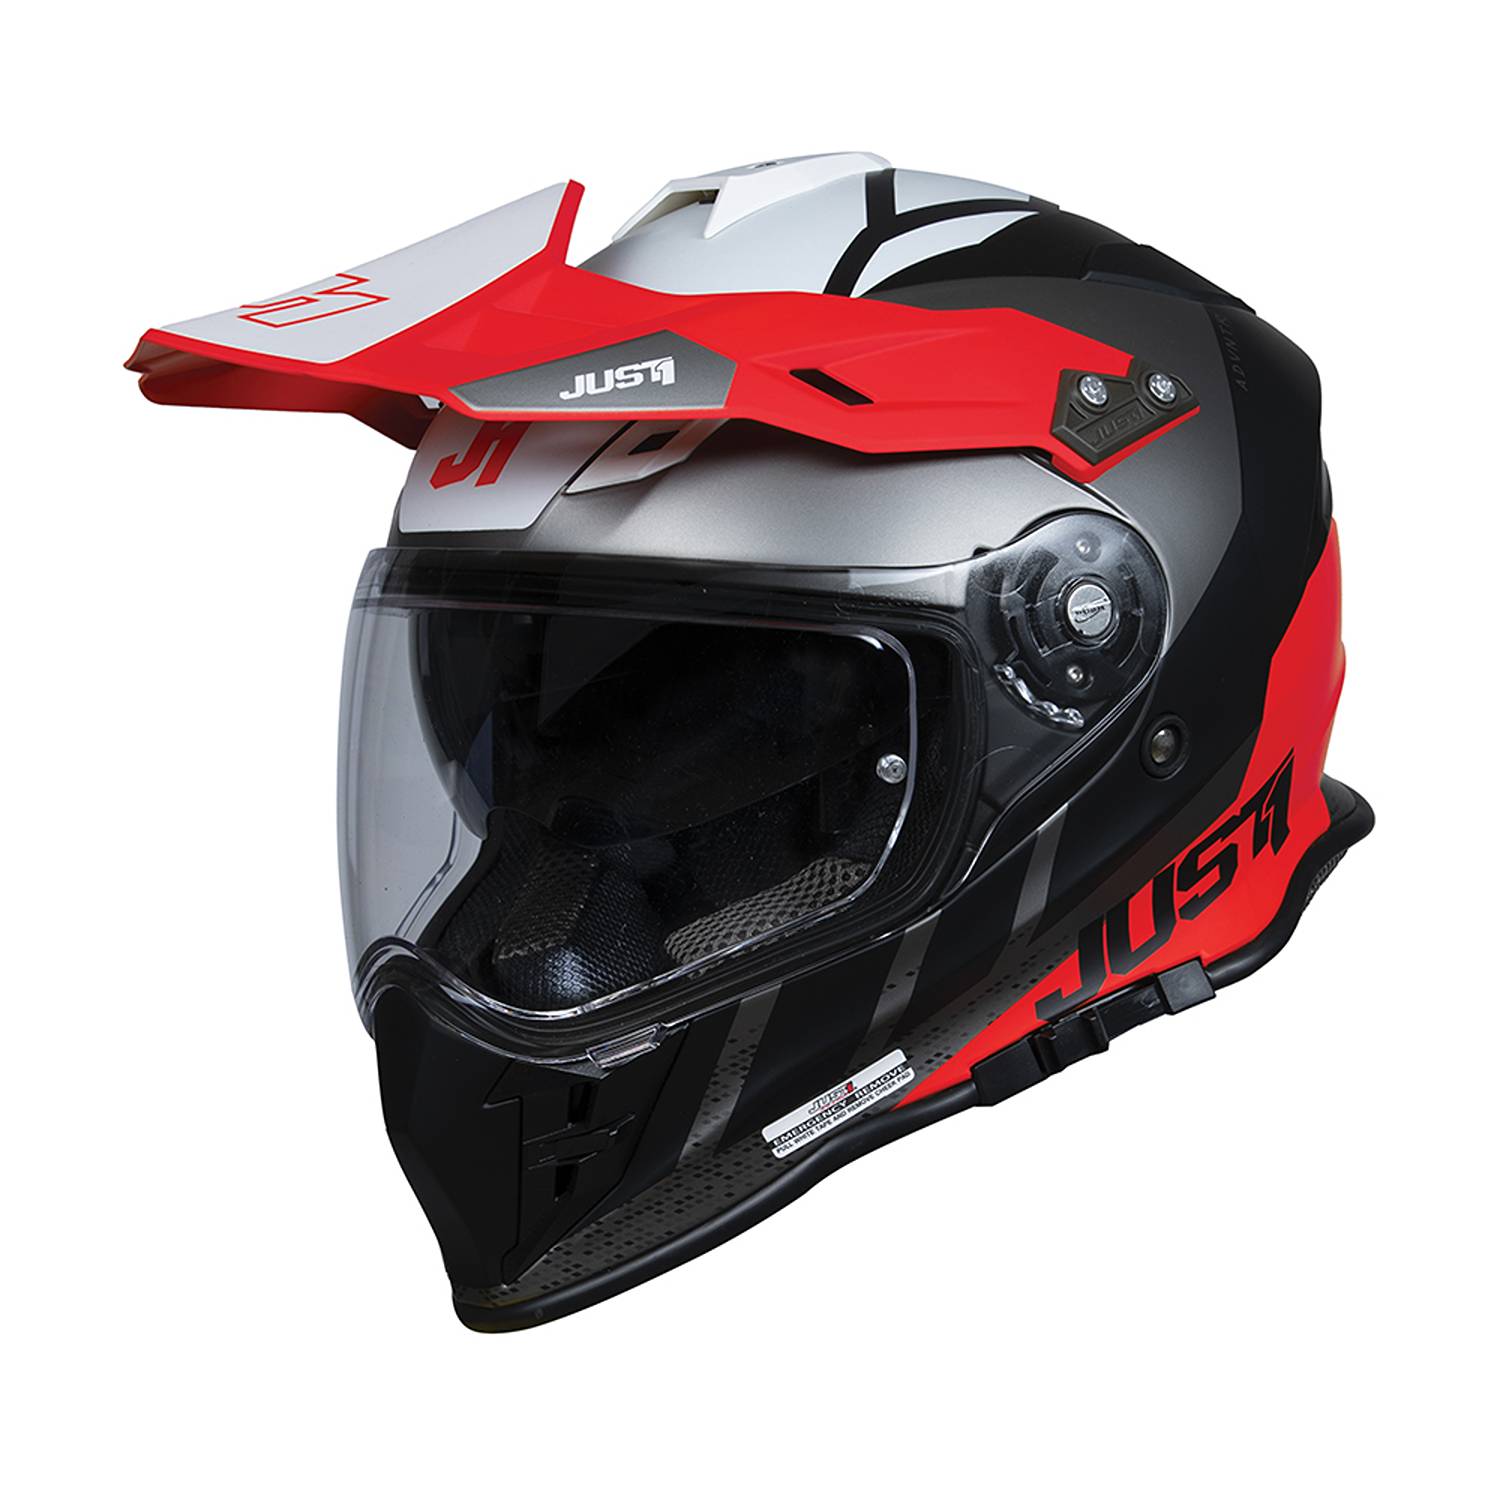 Image of Just1 J34 Pro Outerspace Black Red White Adventure Helmet Size XL ID 8055774028028